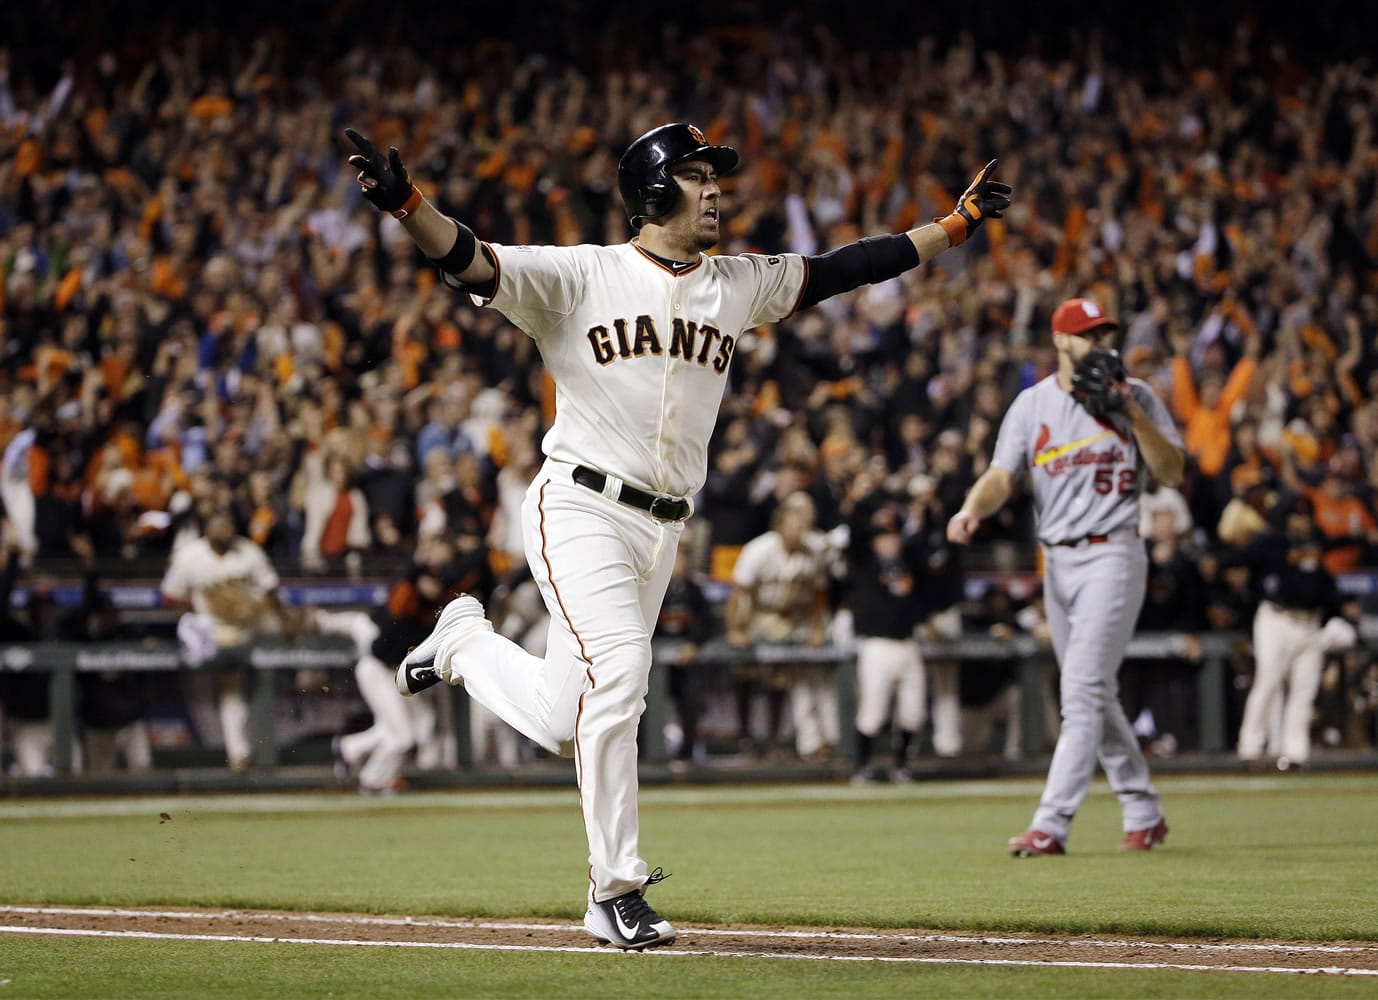 San Francisco Giants' Travis Ishikawa reacts after hitting a walk-off three-run home run during the ninth inning of Game 5 of the National League baseball championship series against the St. Louis Cardinals Thursday, Oct. 16, 2014, in San Francisco. The Giants won 6-3 to advance to the World Series. (AP Photo/David J.